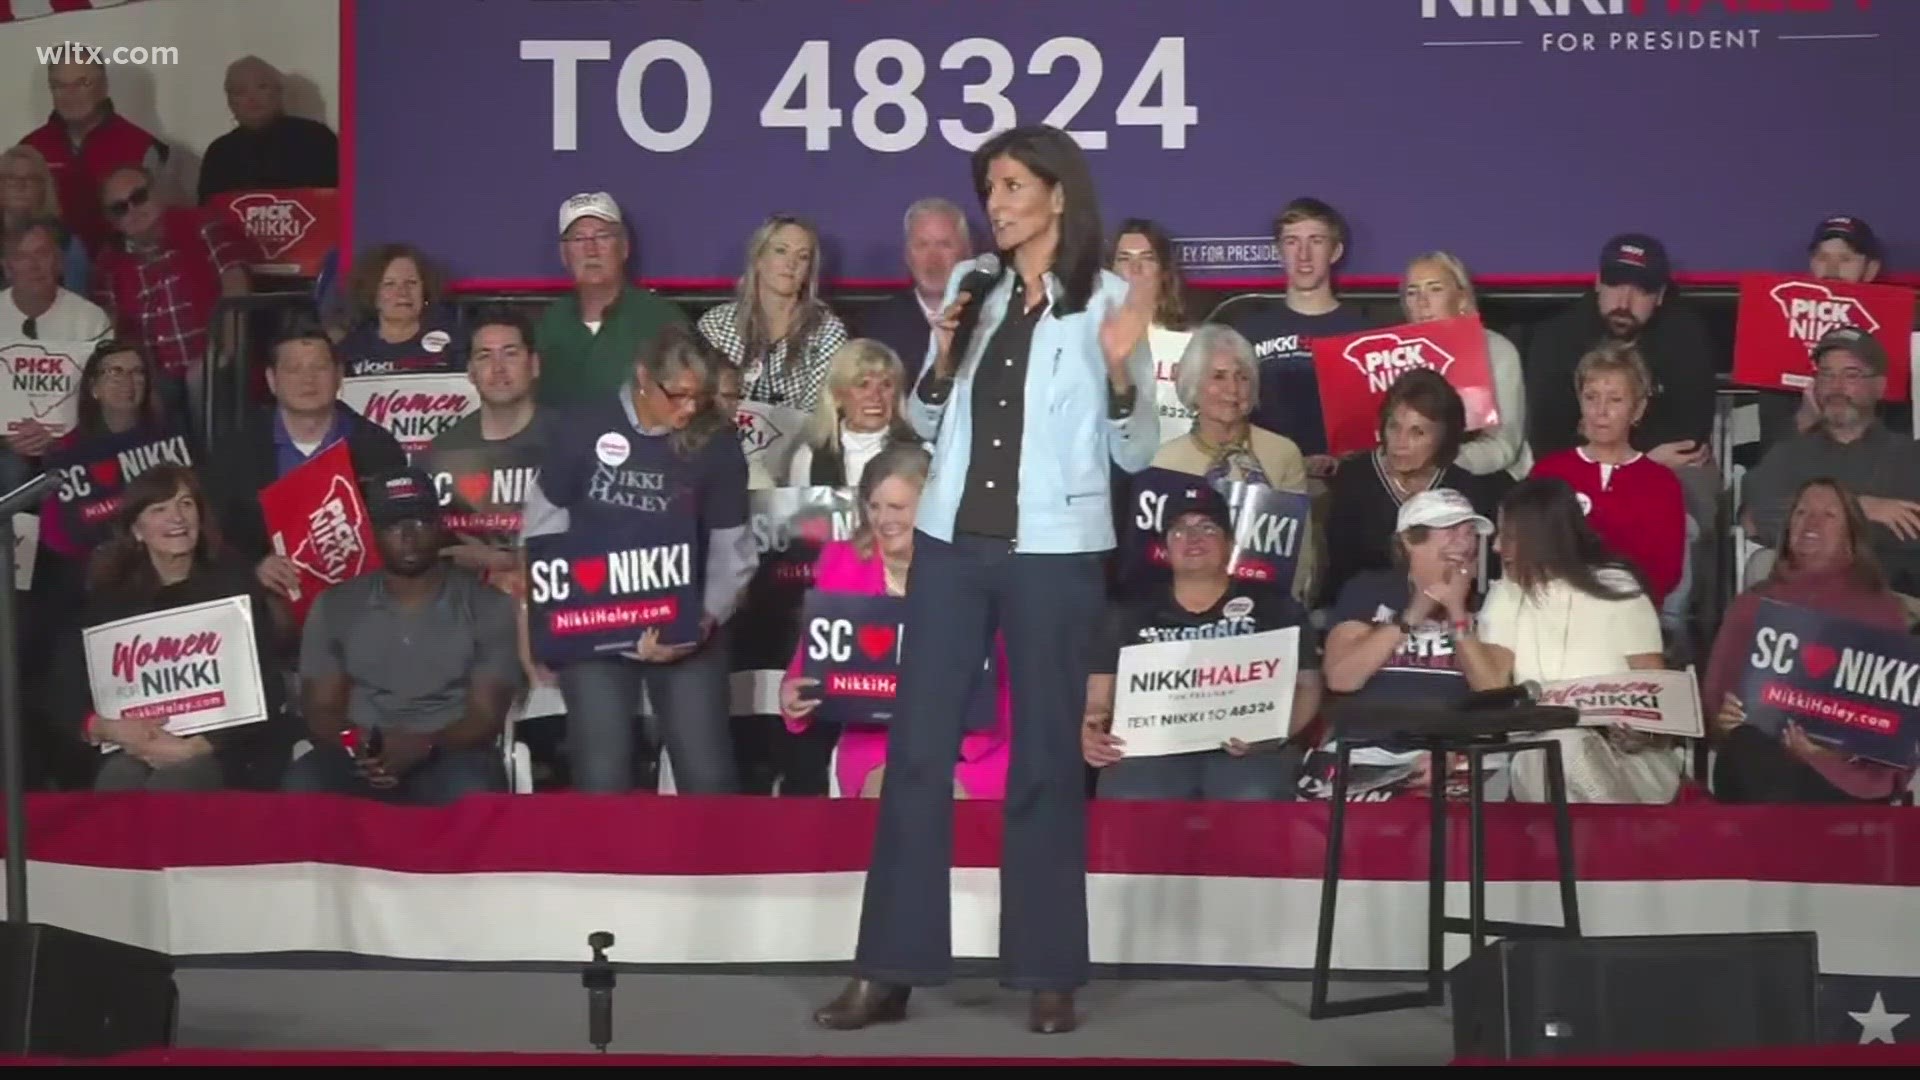 "How'd it work out for the Gamecocks when Trump showed up?" she asked the crowd.